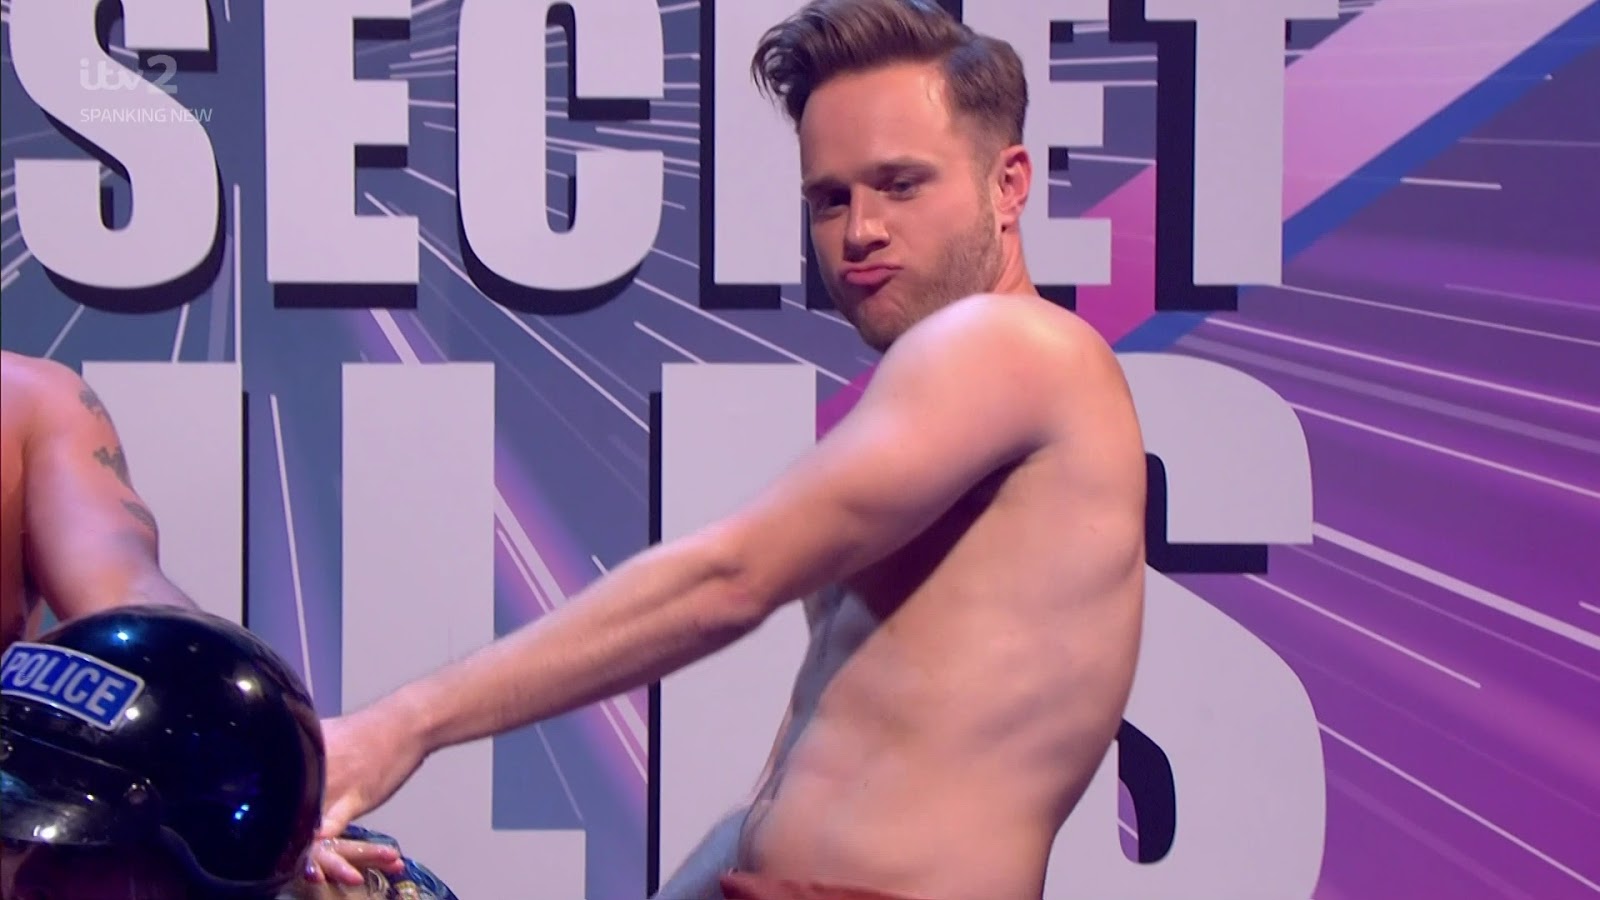 Olly Murs & Will Mellor stripping on Celebrity Juice.